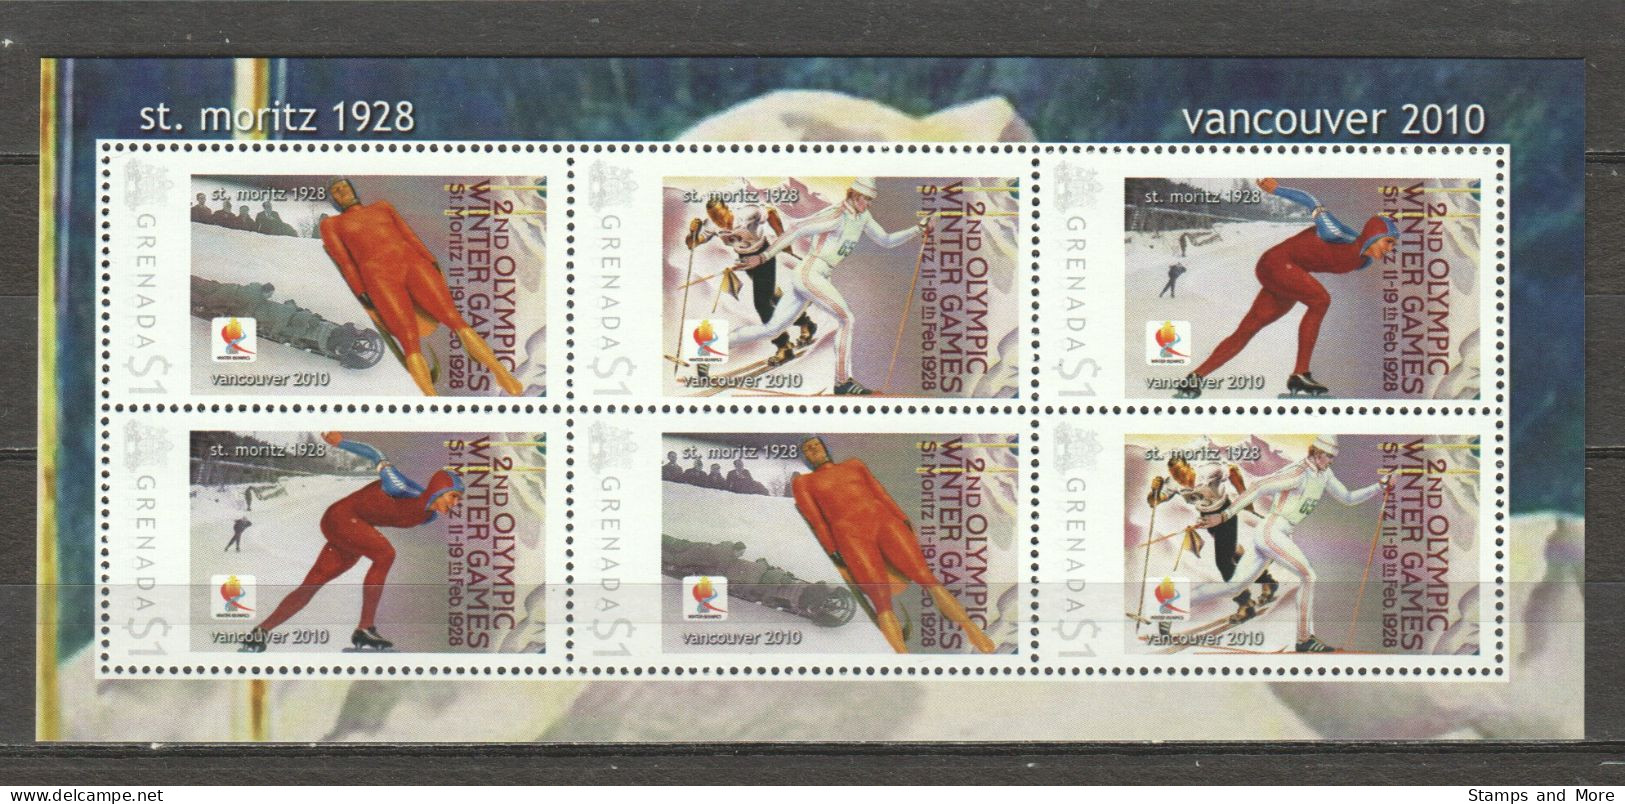 Grenada - Limited Edition Sheet 02 MNH - WINTER OLYMPICS VANCOUVER 2010 - St Moritz 1928 - Winter 2010: Vancouver